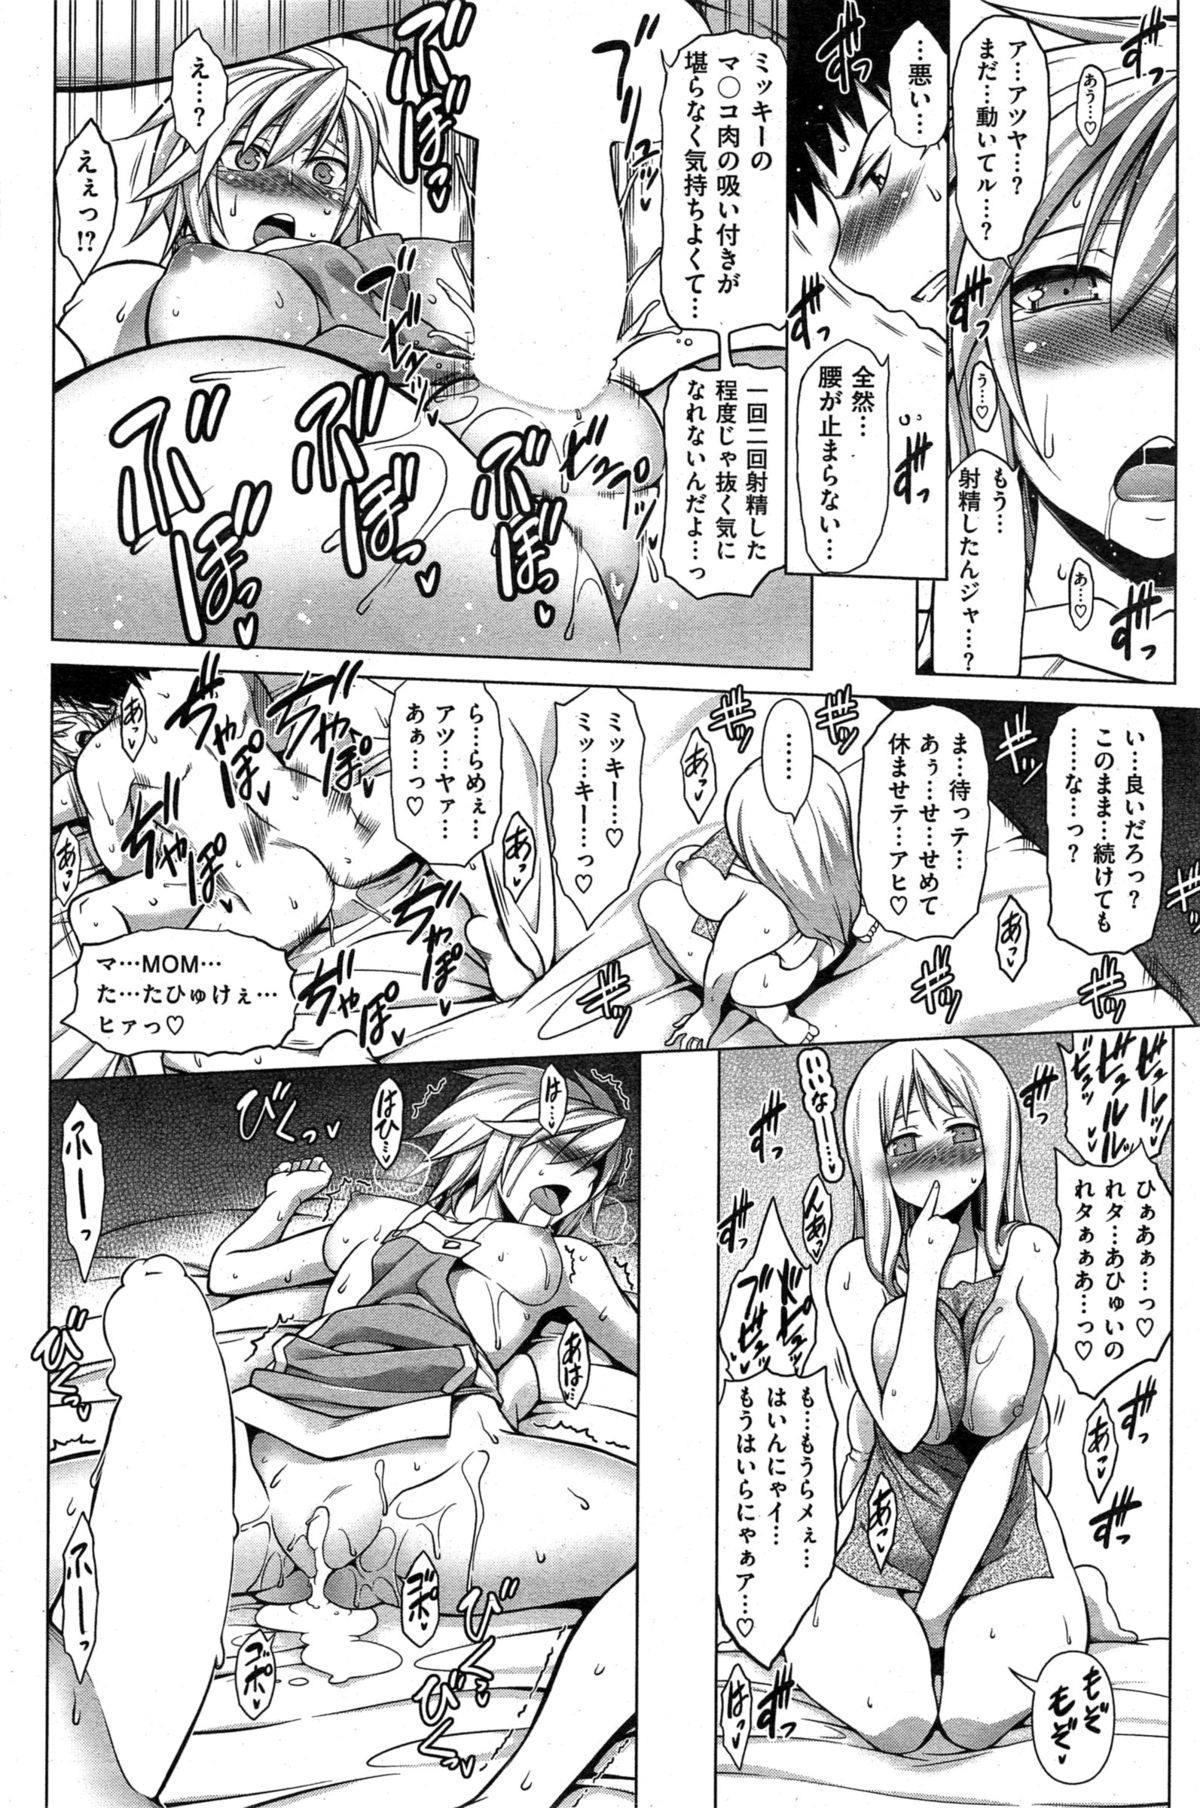 [TANABE] Ougon Taiken - Gold Experience page 32 full